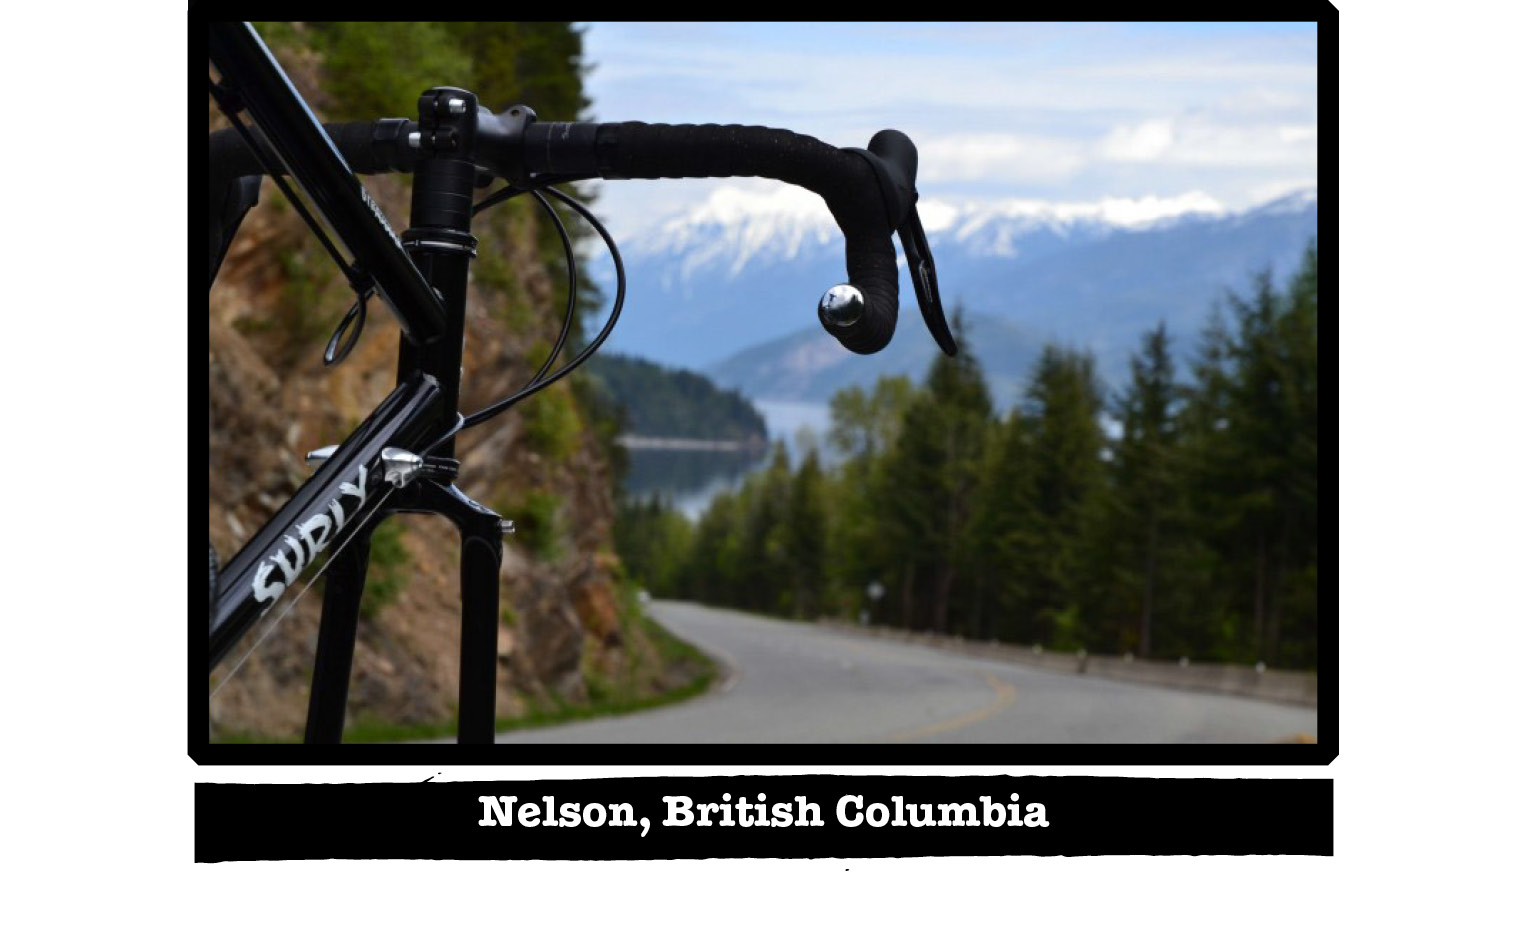 The front of a Surly bike facing down a hill on a paved road in the mountains - Nelson, British Columbia tag below image